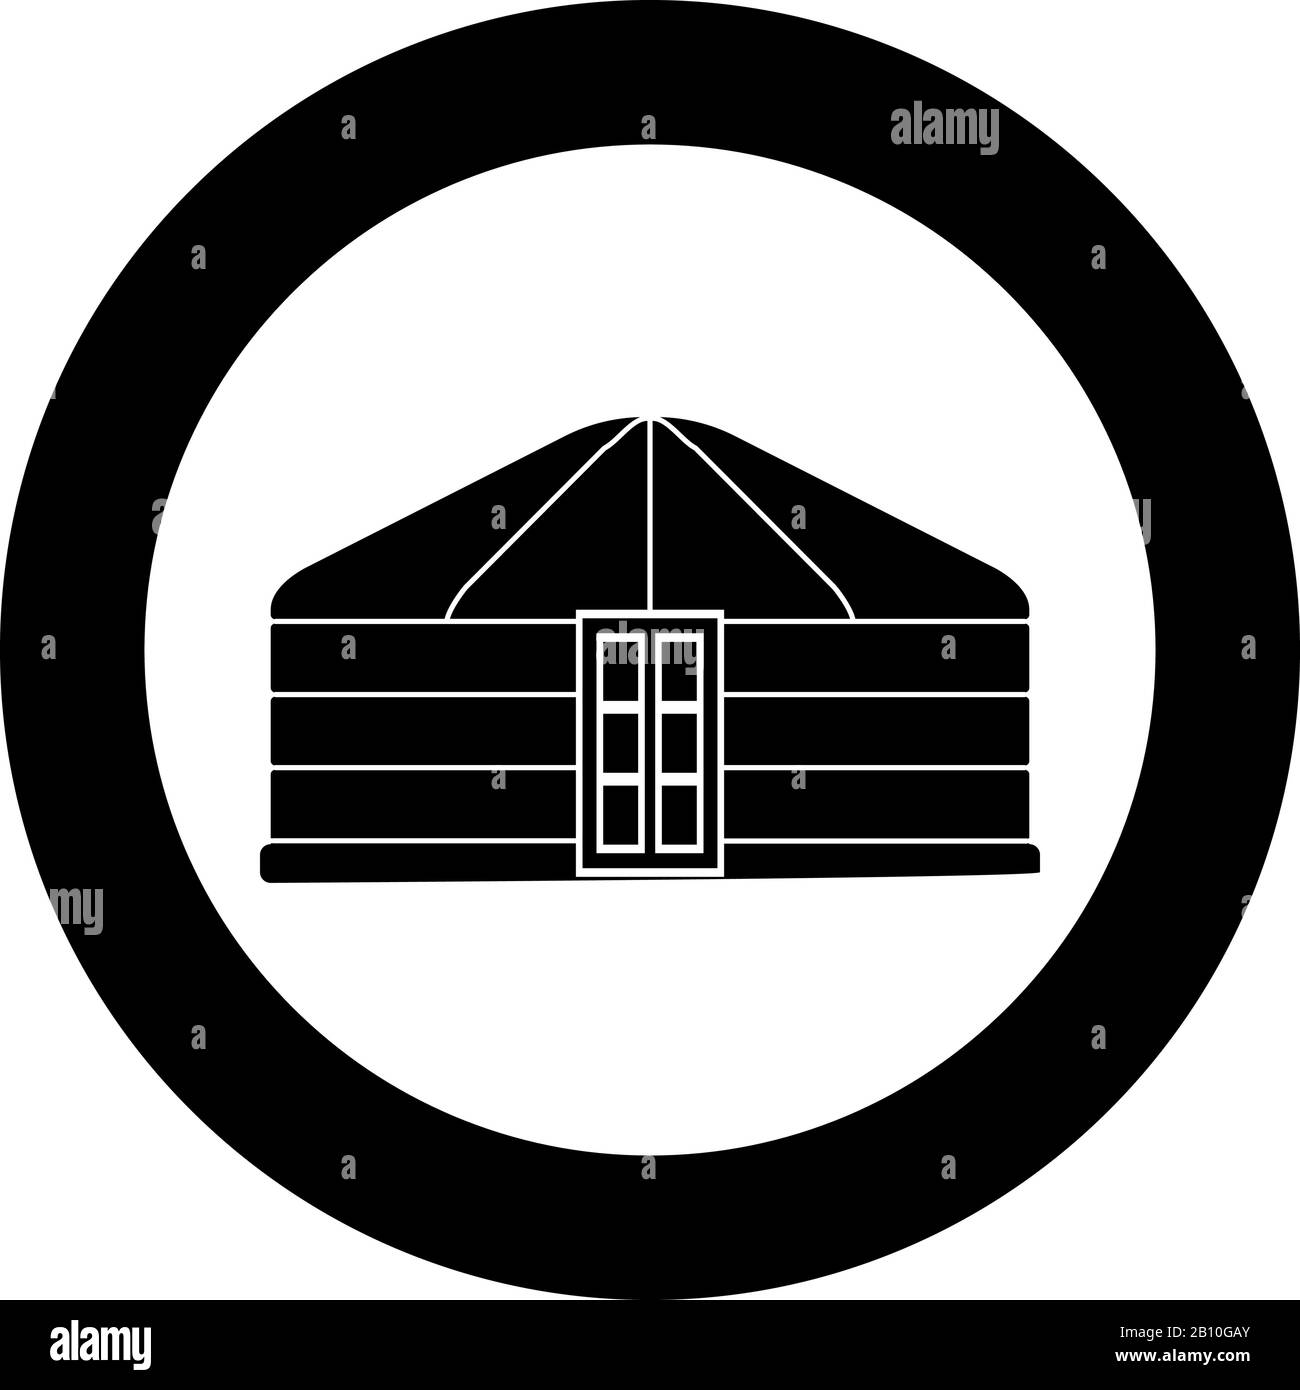 Yurt of nomads Portable frame dwelling with door Mongolian tent covering building icon in circle round black color vector illustration flat style Stock Vector